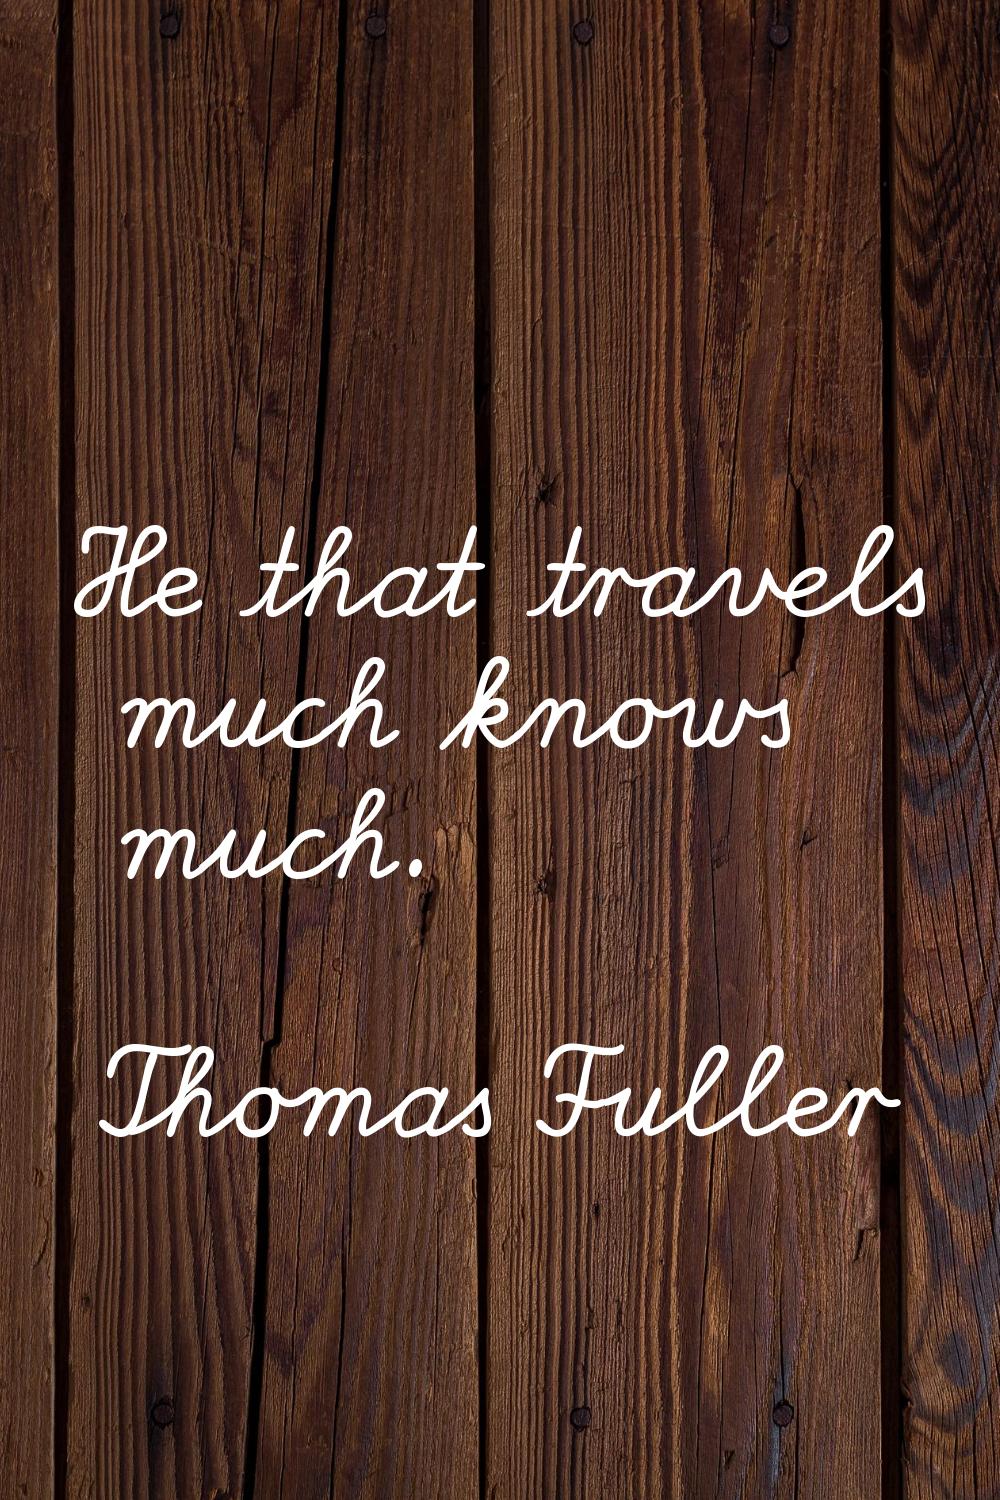 He that travels much knows much.